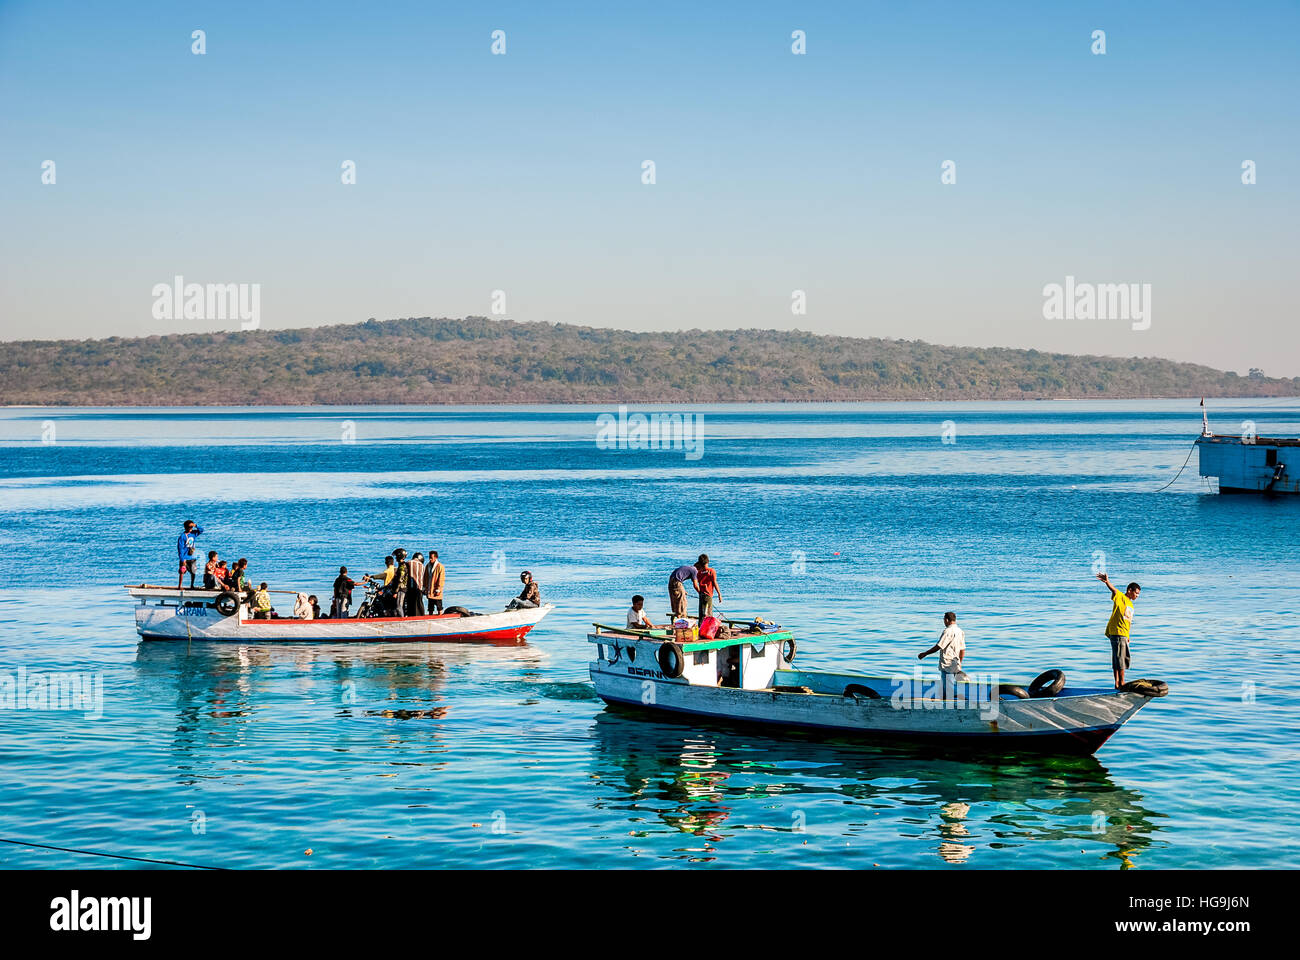 People standing on two wooden boats available for a rent as local transport, near Kupang ferry harbor in East Nusa Tenggara, Indonesia. Stock Photo